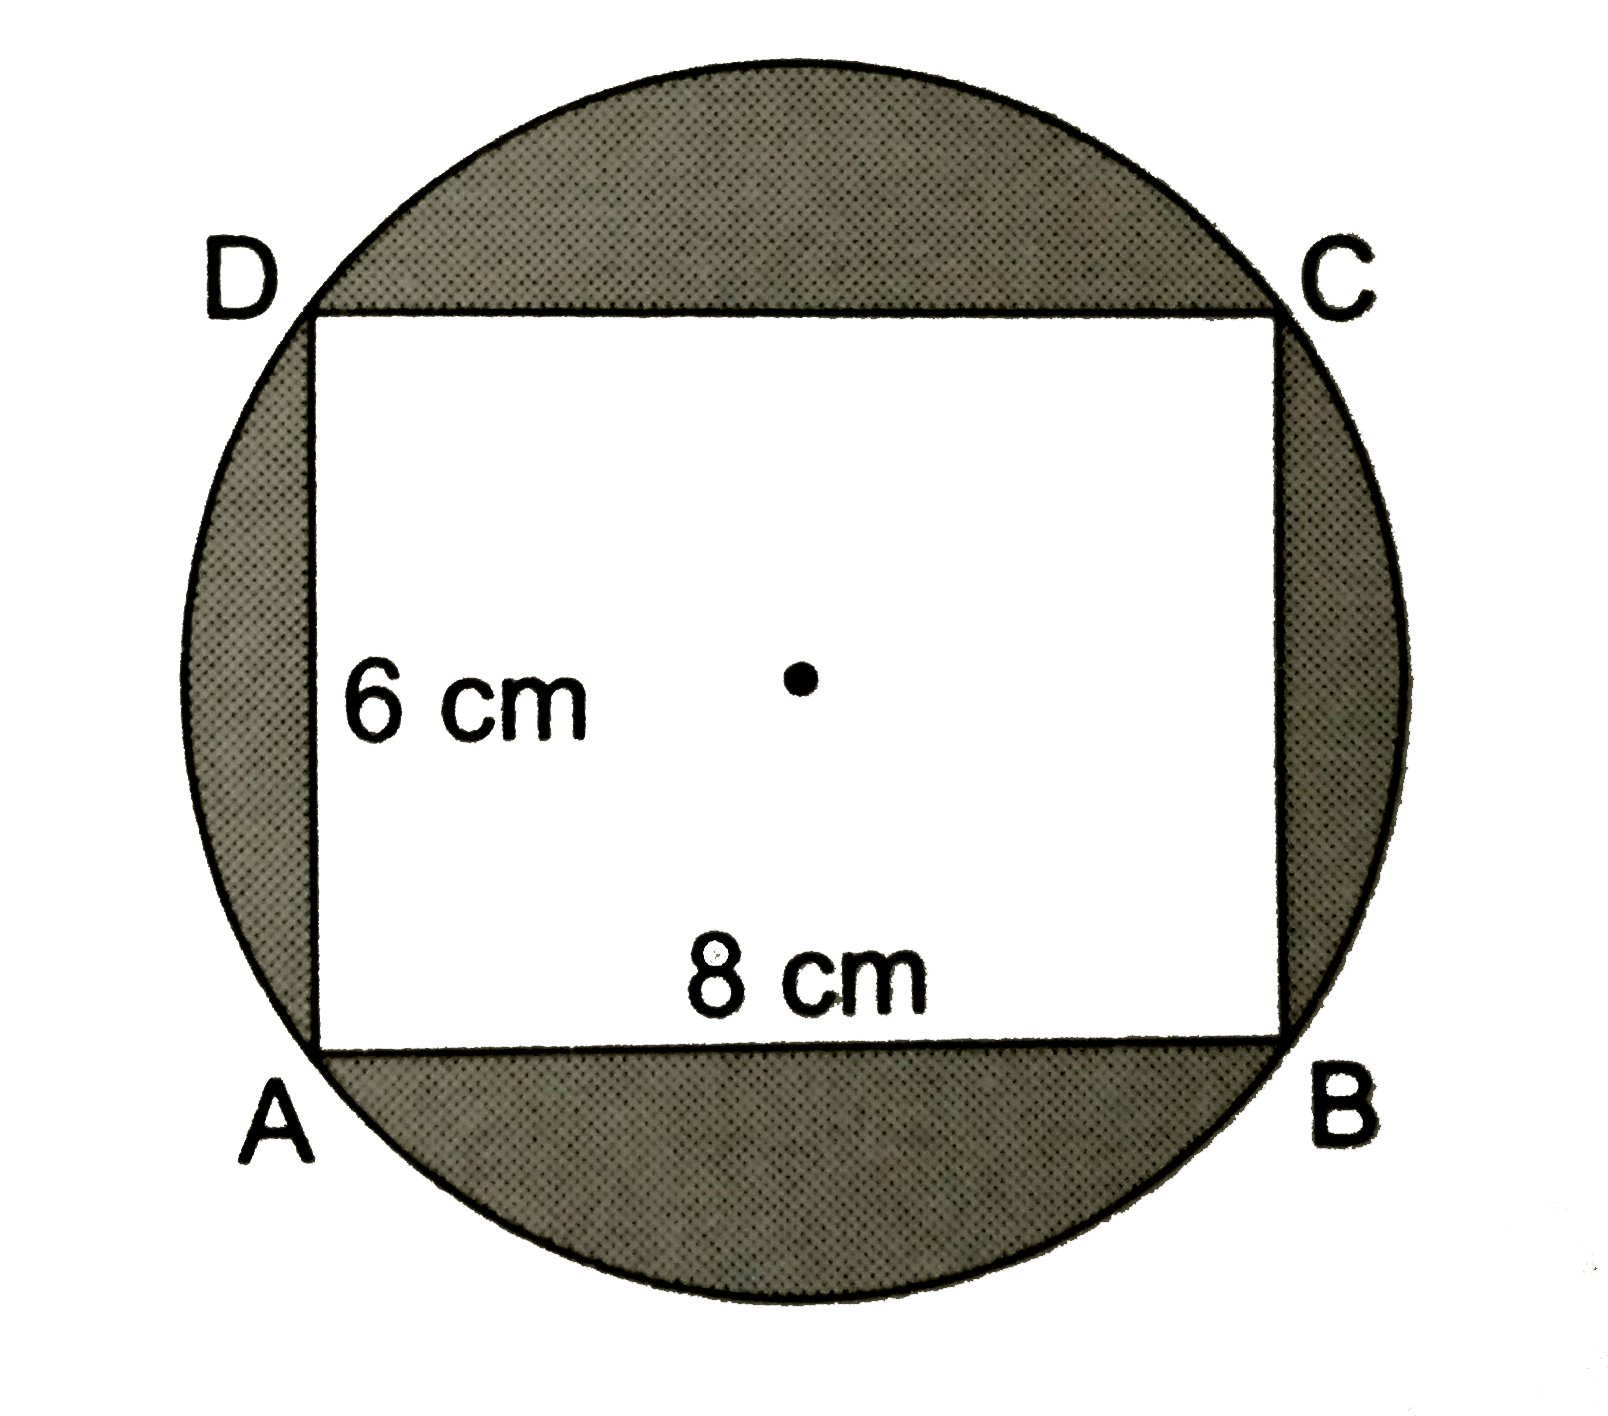 In the given figure ABCD is a rectangle inscribed in a circle having length 8 cm and breadth 6 cm. If pi=3.14 then the area of the shaded region is